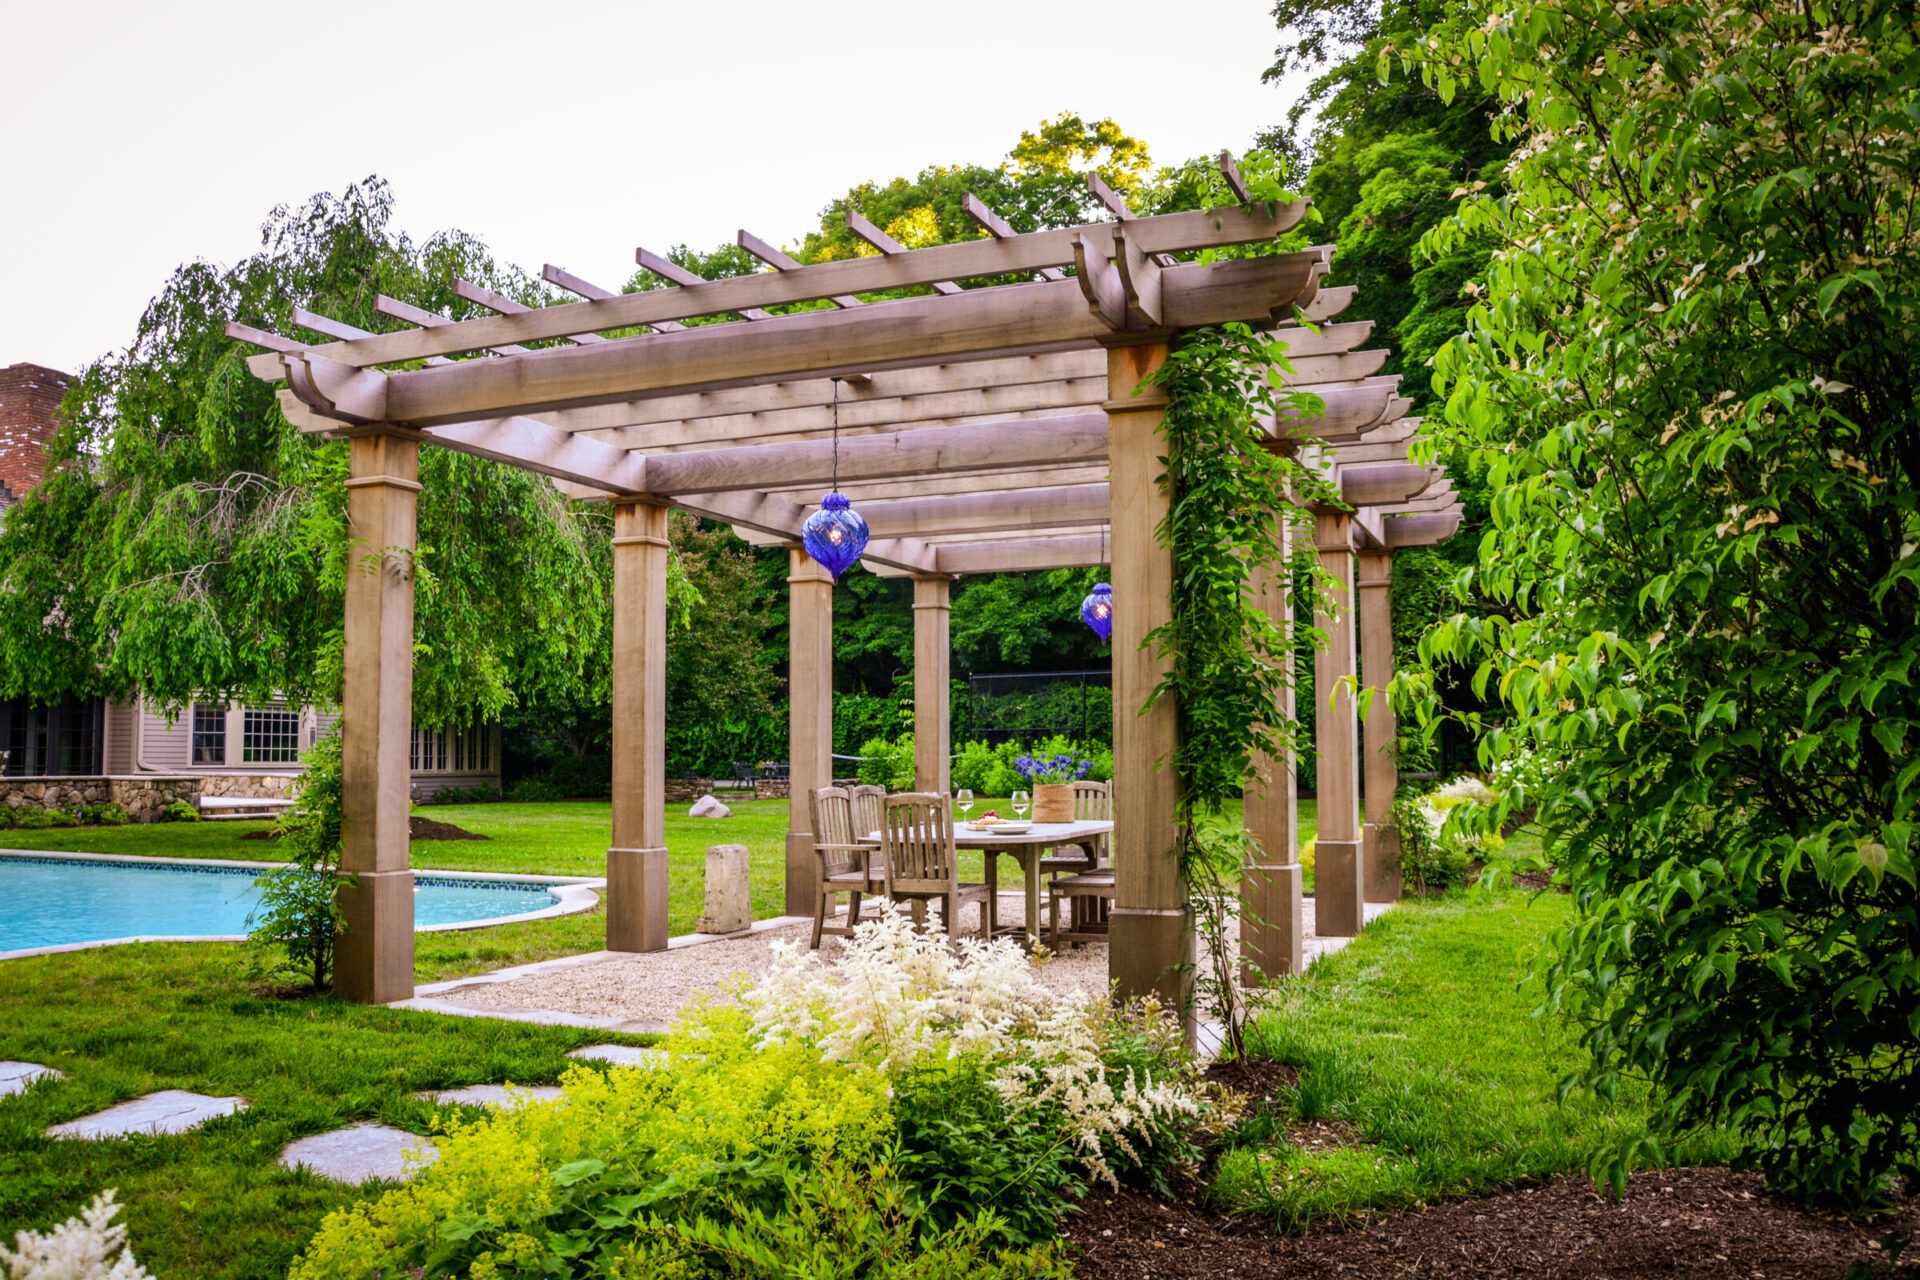 A lush garden setting with a wooden pergola, dining furniture underneath, hanging blue lanterns, a swimming pool in the background, and greenery all around.